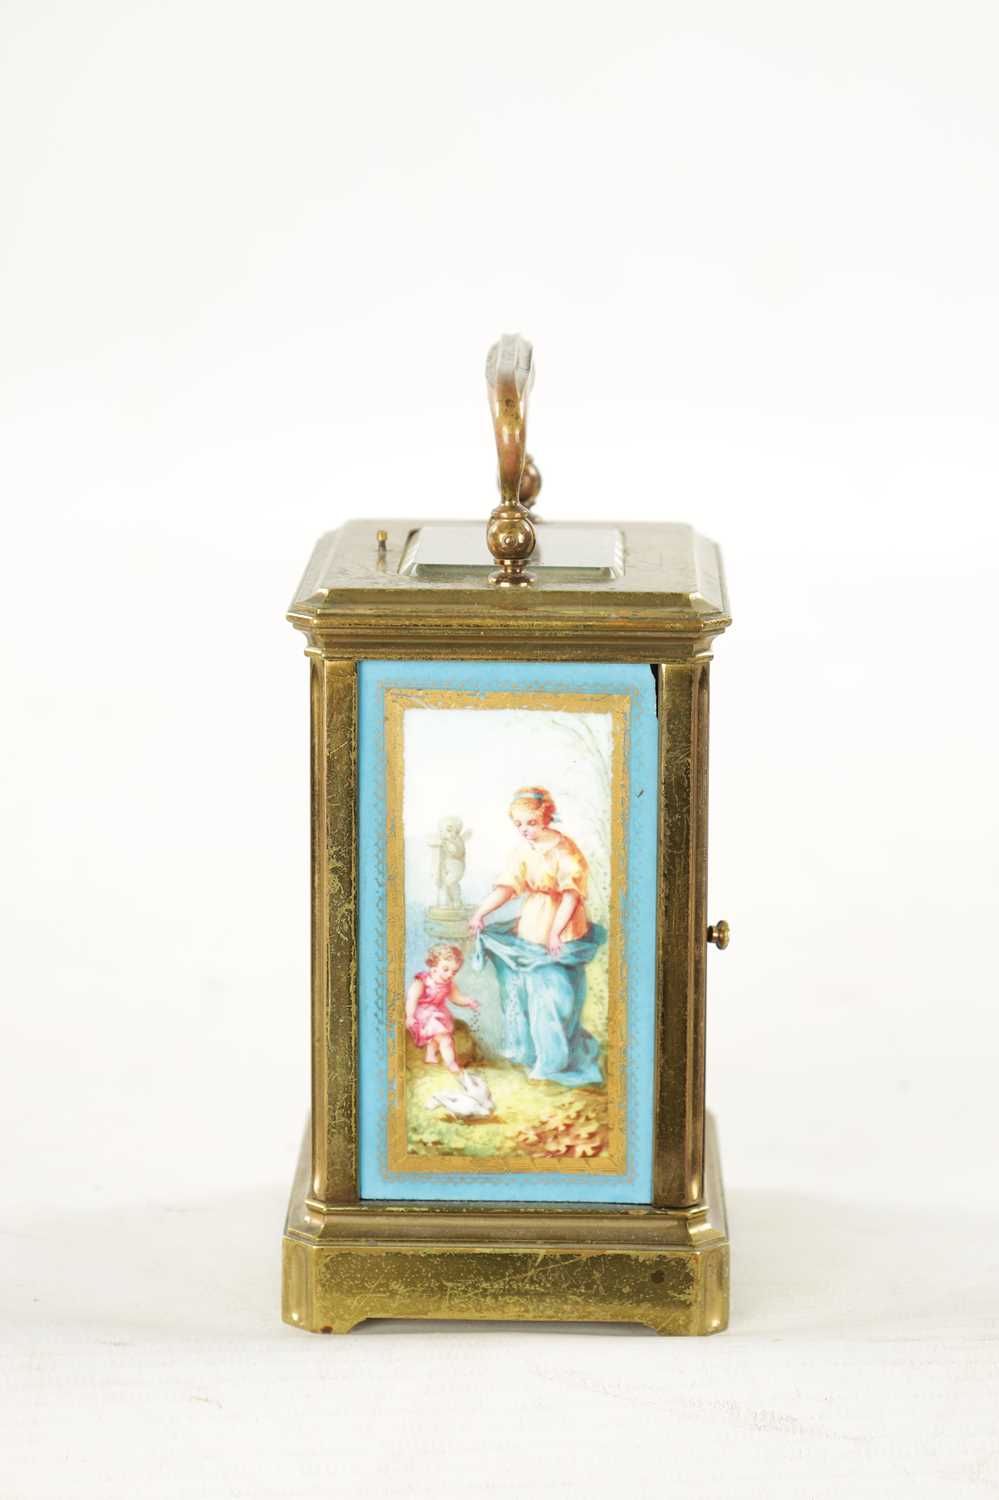 A LATE 19TH CENTURY FRENCH PORCELAIN PANELLED REPEATING CARRIAGE CLOCK - Image 5 of 10